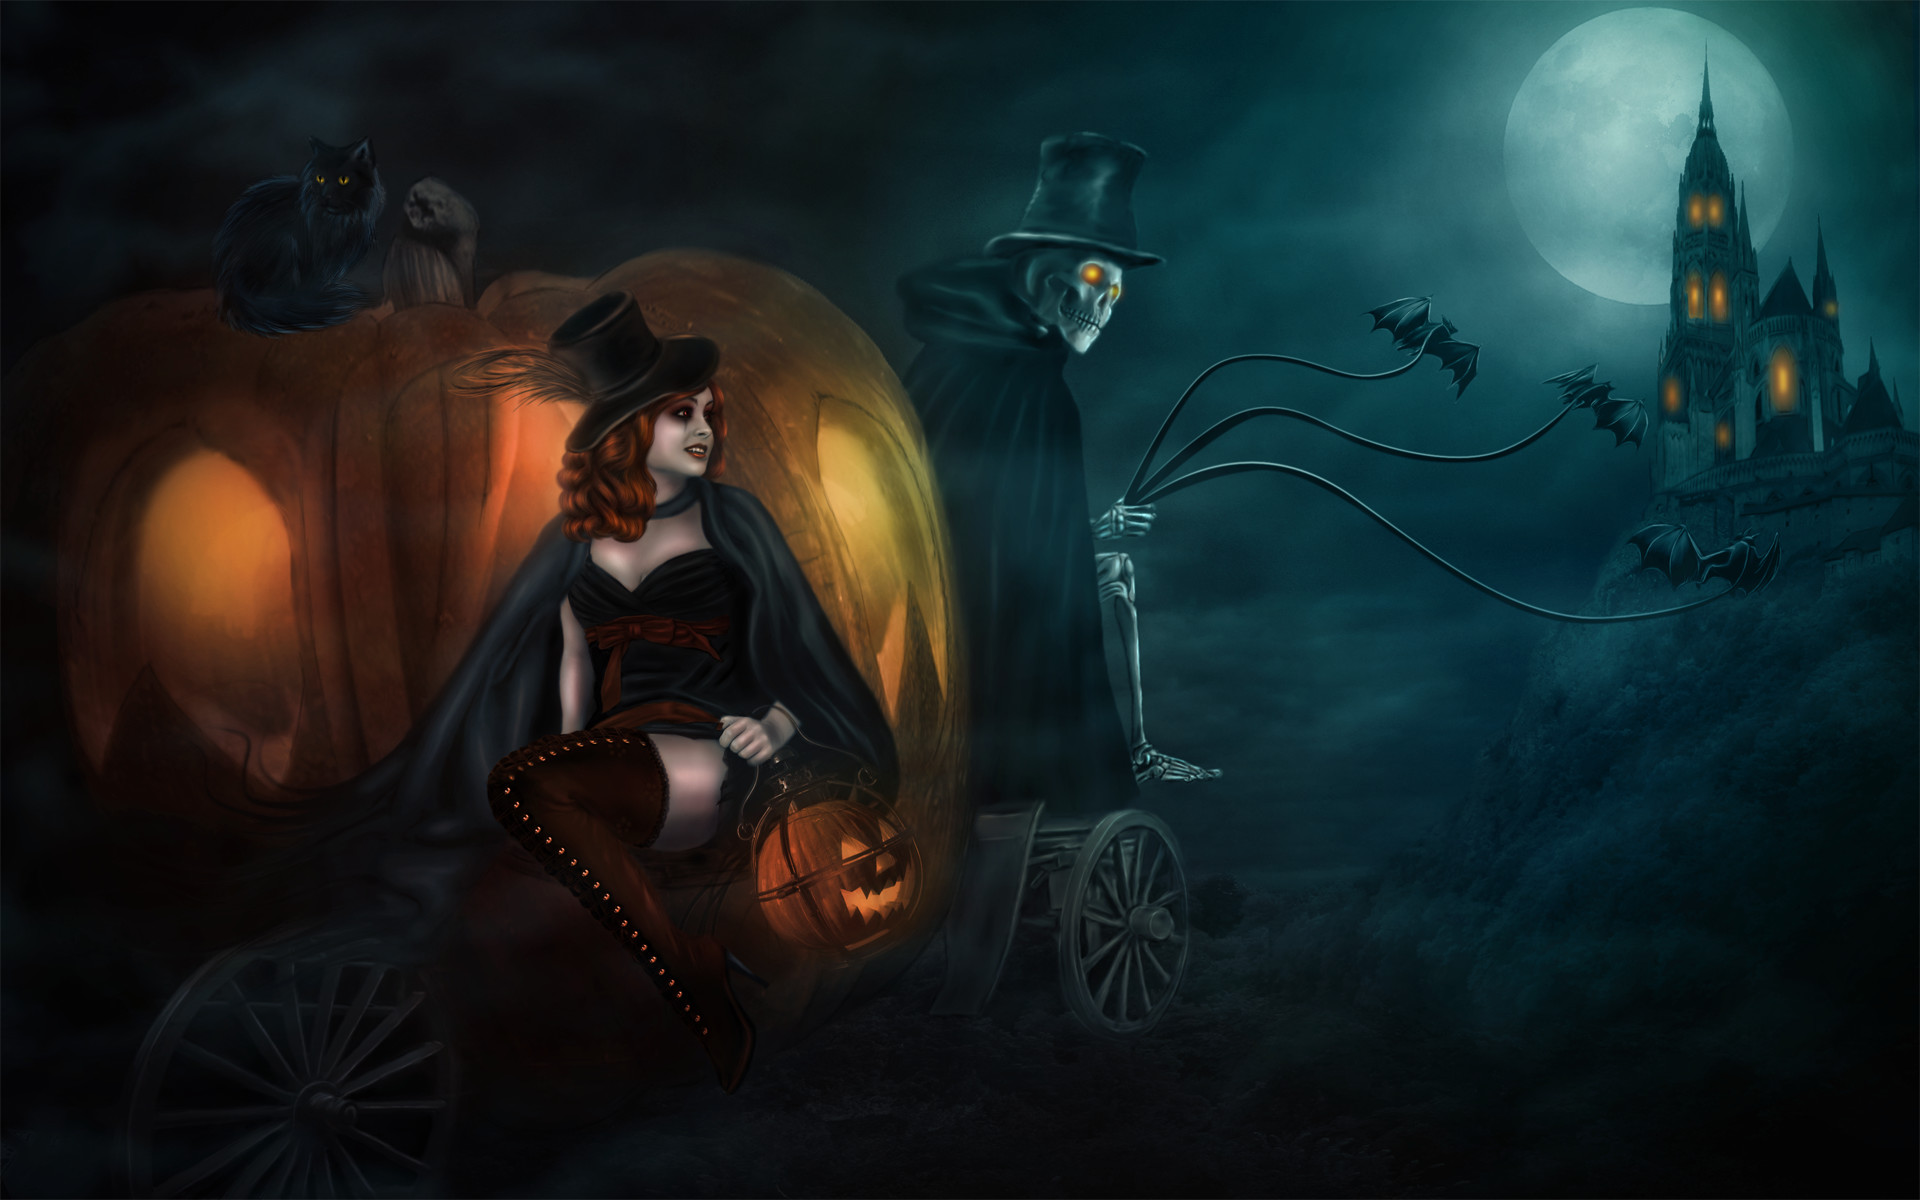 Witch Wallpaper - Free download and software reviews - CNET Download